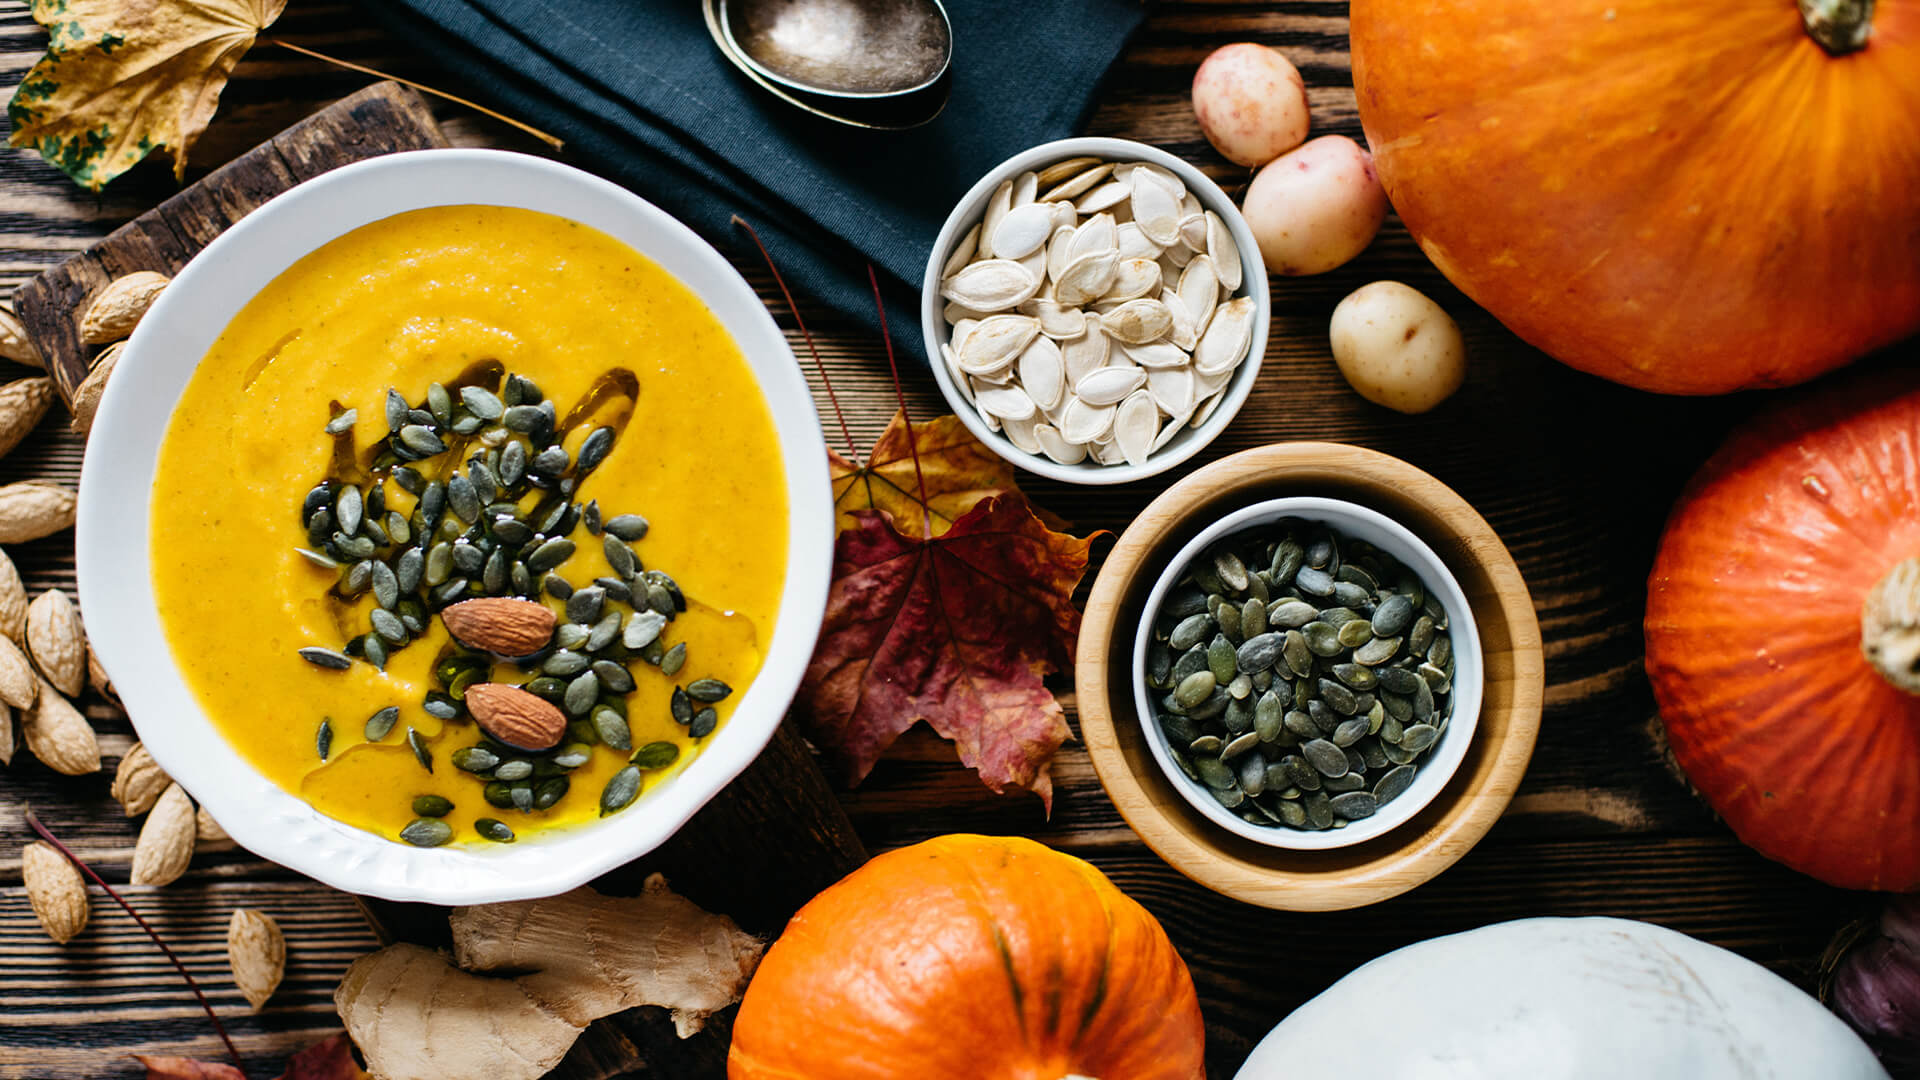 How Eating Pumpkin Can Brighten Your Skin, According to A Nutritionist